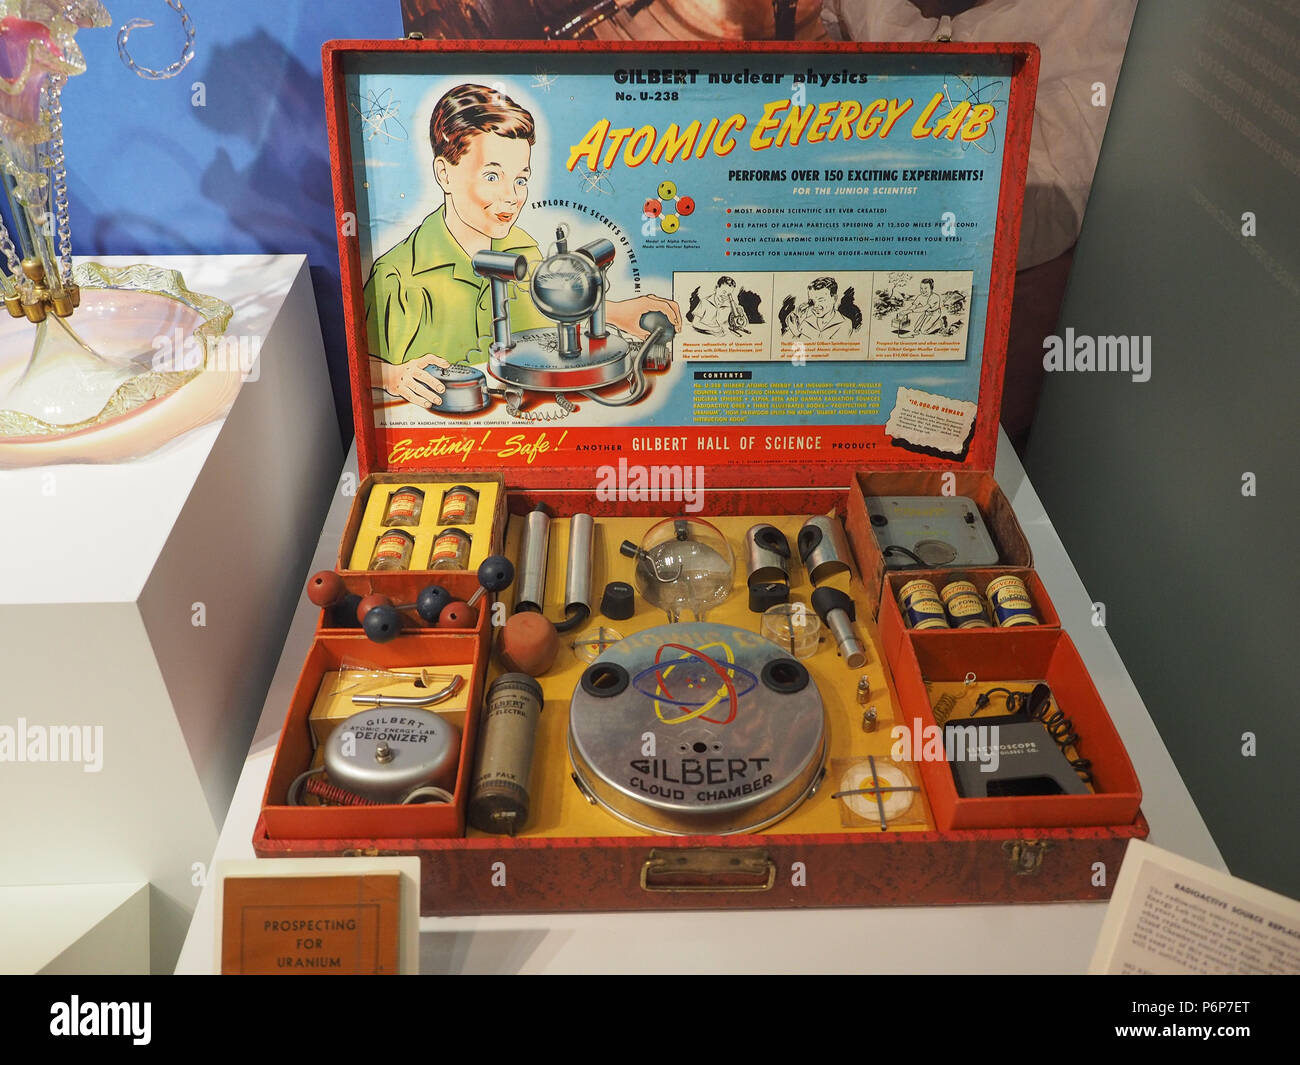 BELFAST, UK - CIRCA JUNE 2018: The Gilbert 238 Atomic Energy Lab from 1951  is the most dangerous toy, as it contained Uranium ore samples and radioact  Stock Photo - Alamy